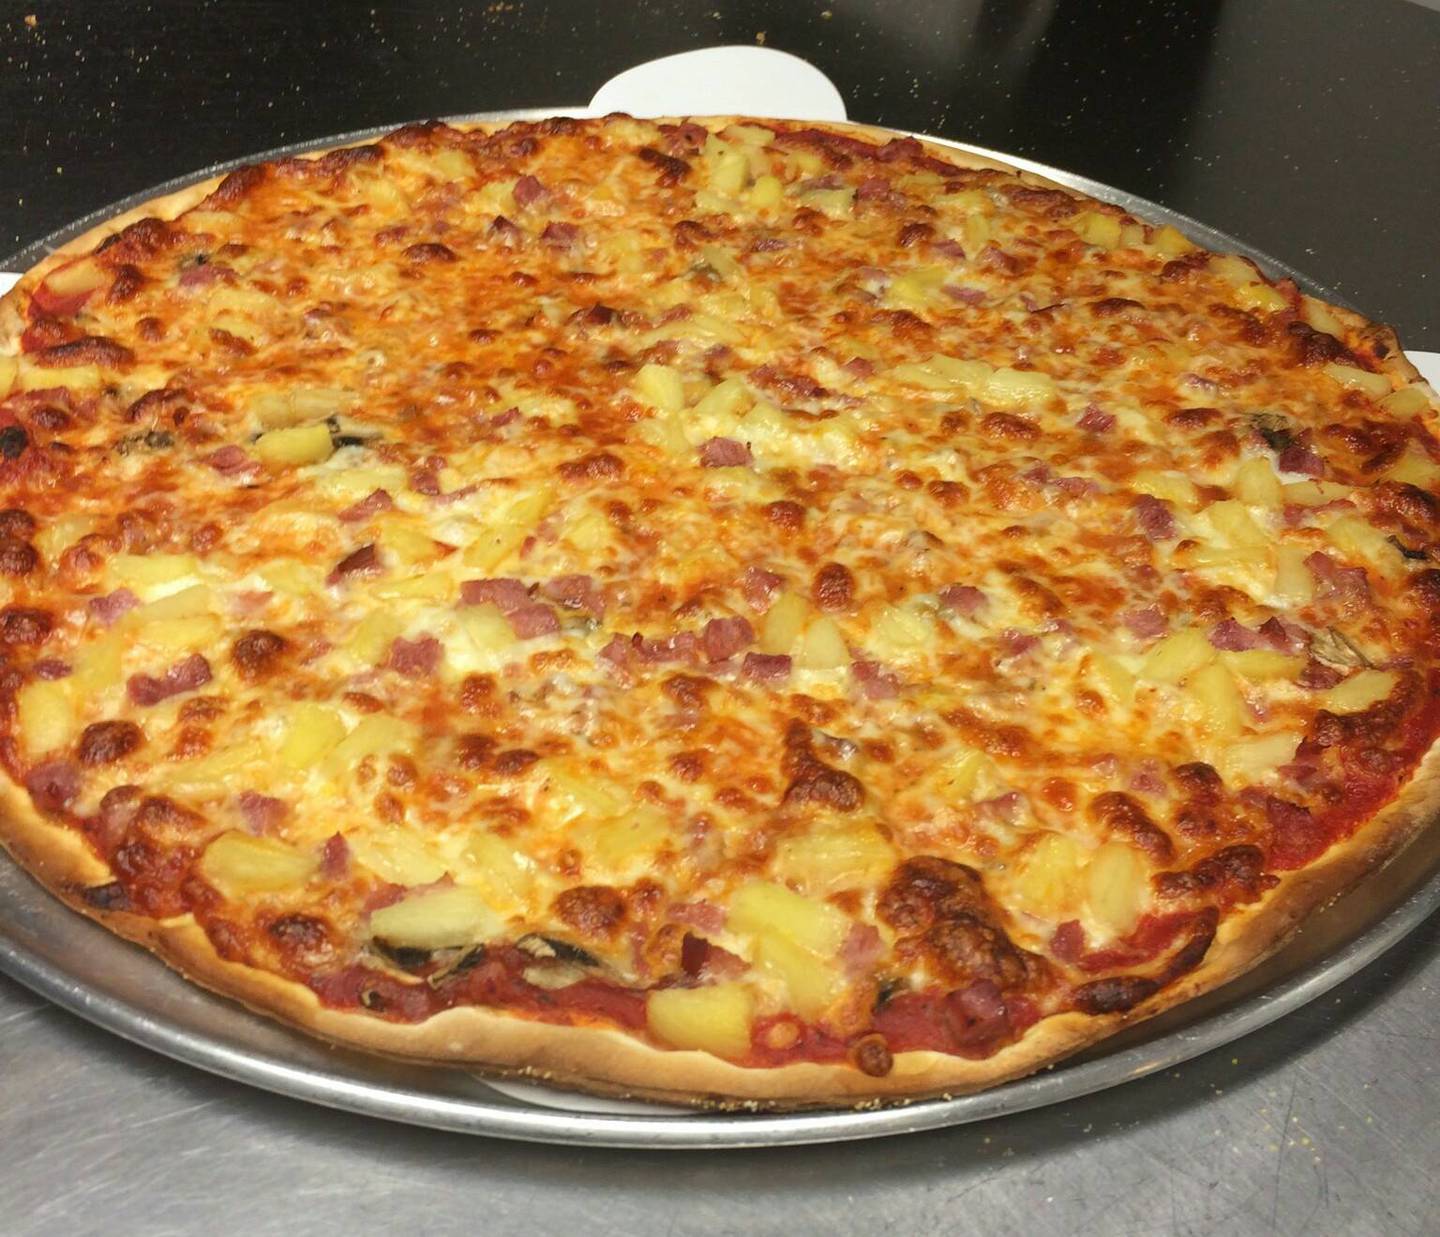 Angelo's Pizza in Downers Grove was voted in the top 10 pizza places in DuPage County by readers in 2021. (Photo from Angelo's Pizza Facebook page)